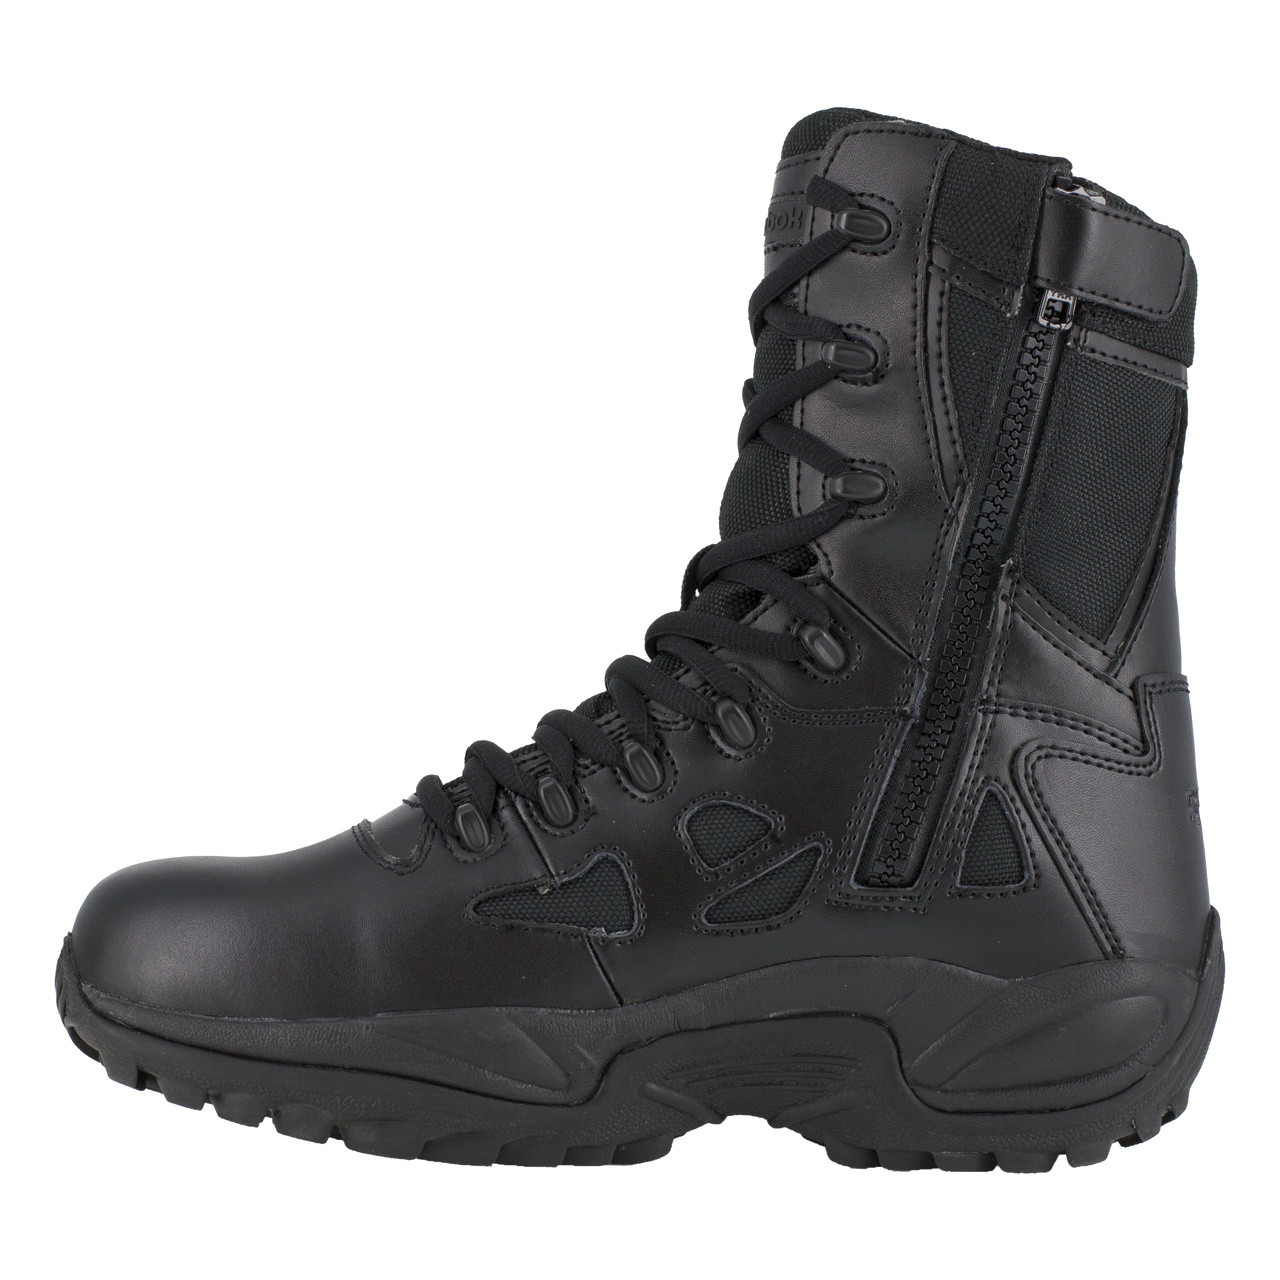 REEBOK BLACK 8" STEALTH BOOT SIDE ZIP SOFT TOE BOOTS RB8877